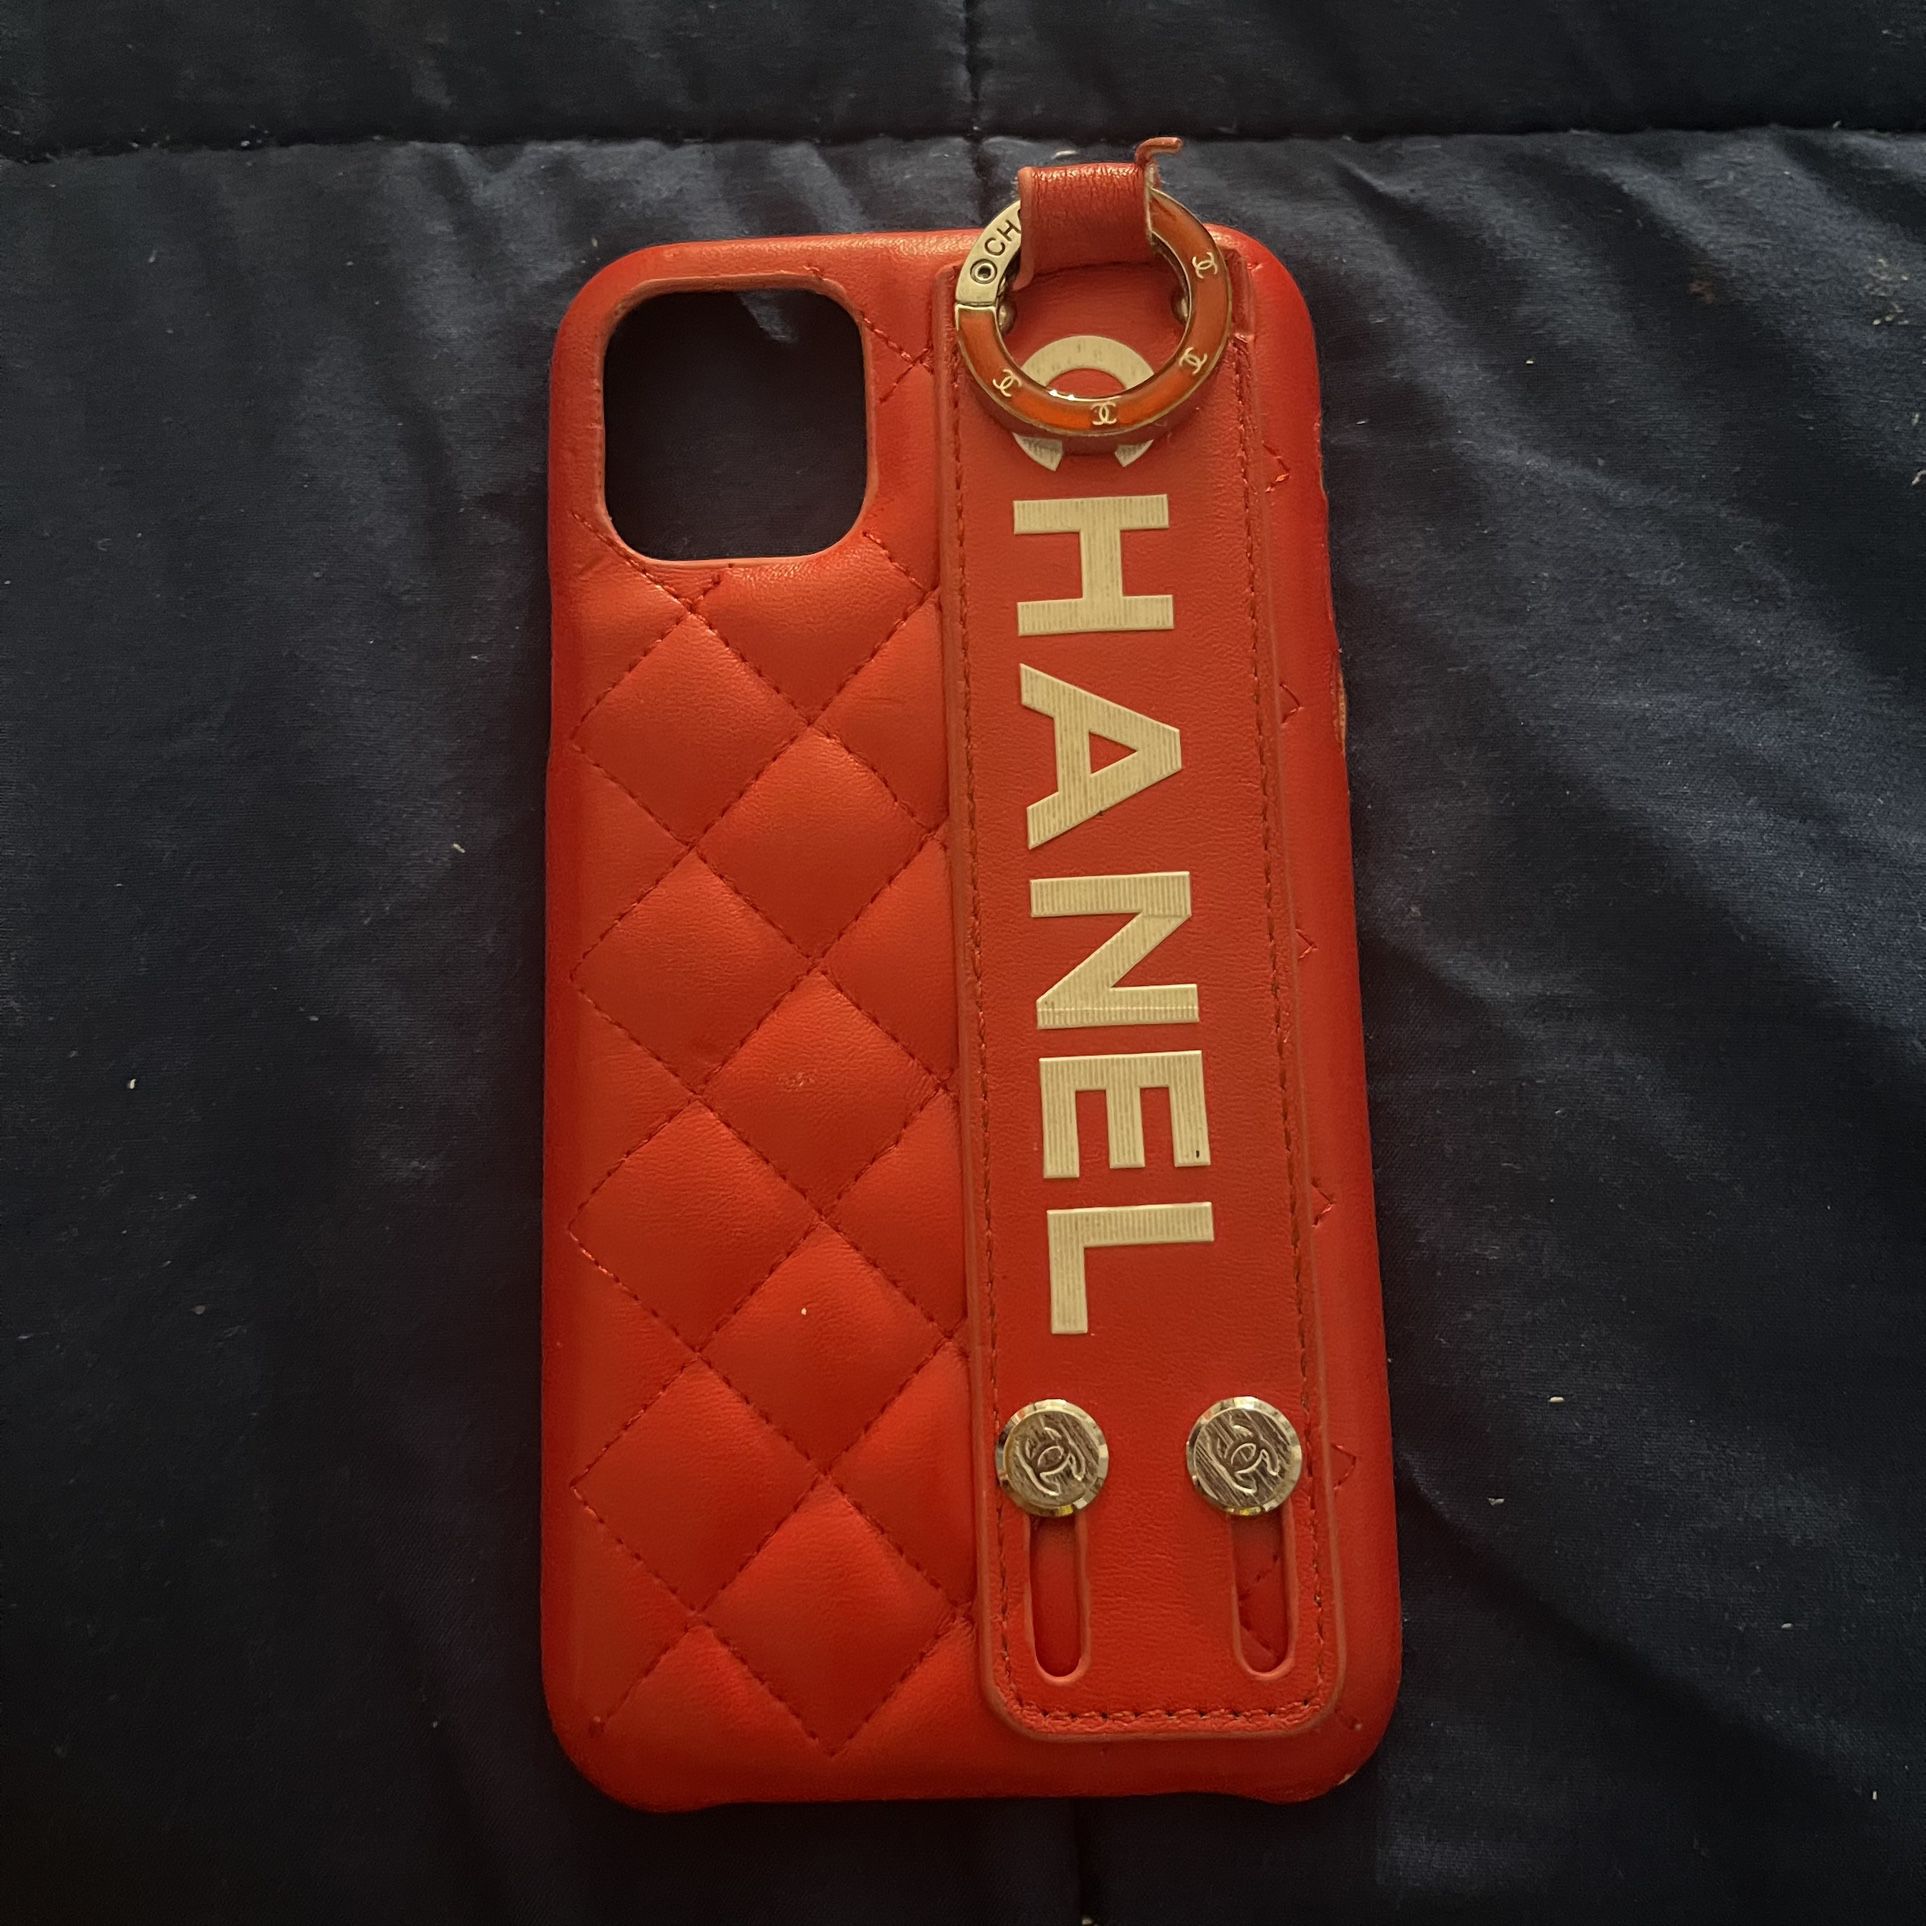 Handmade Chanel iPhone 4 Case Studded Chanel iPhone Case